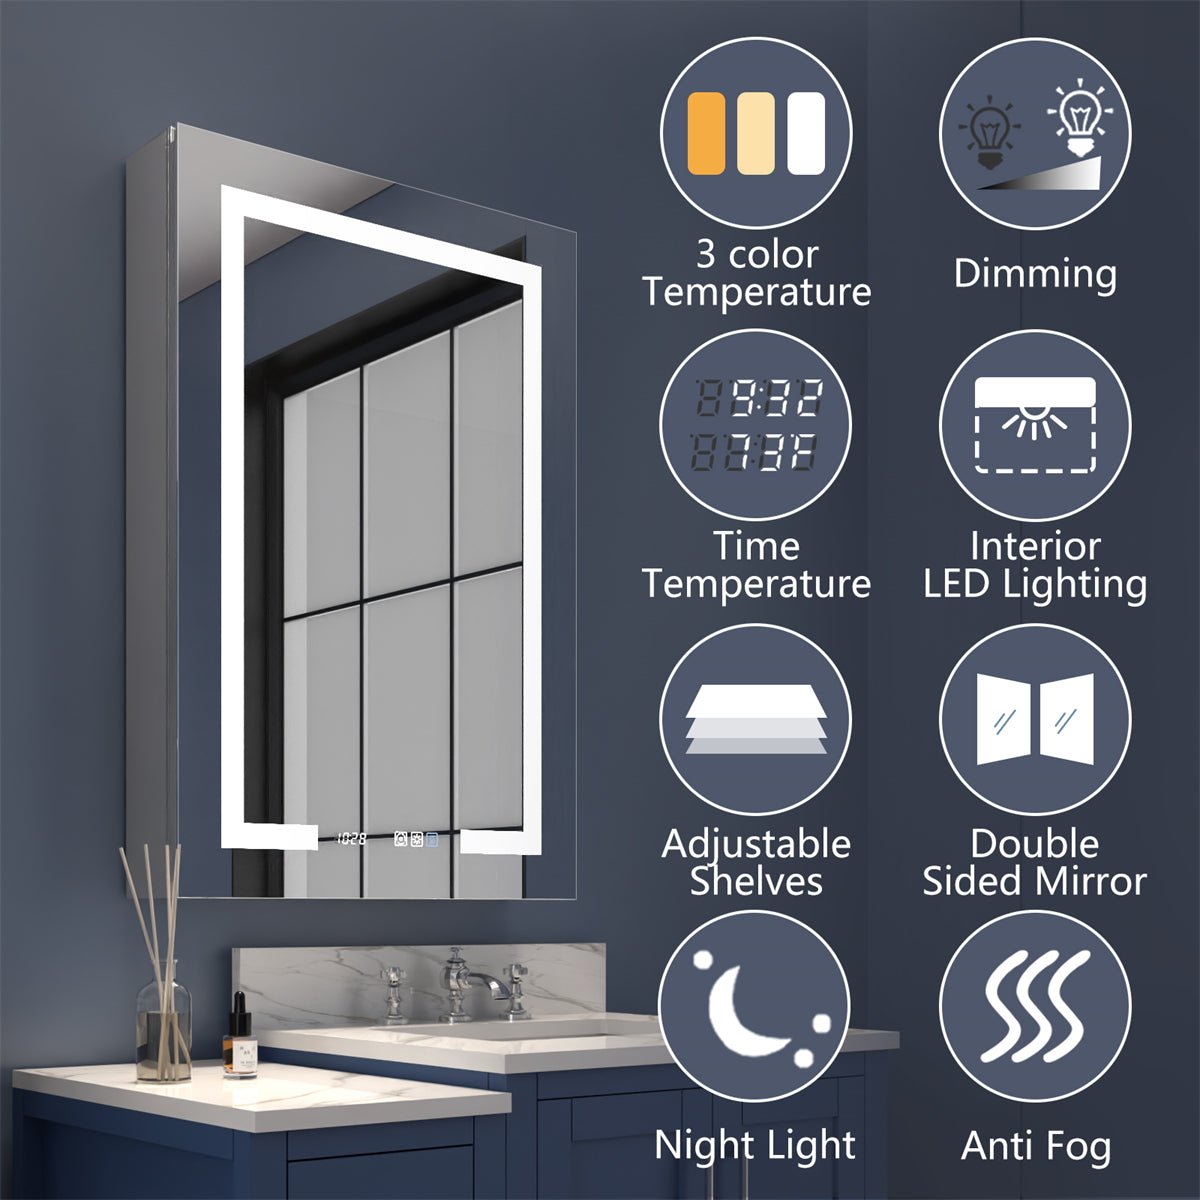 Boost-M2 24" W x 36" H LED Lighted Bathroom Medicine Cabinet with Mirror and Clock